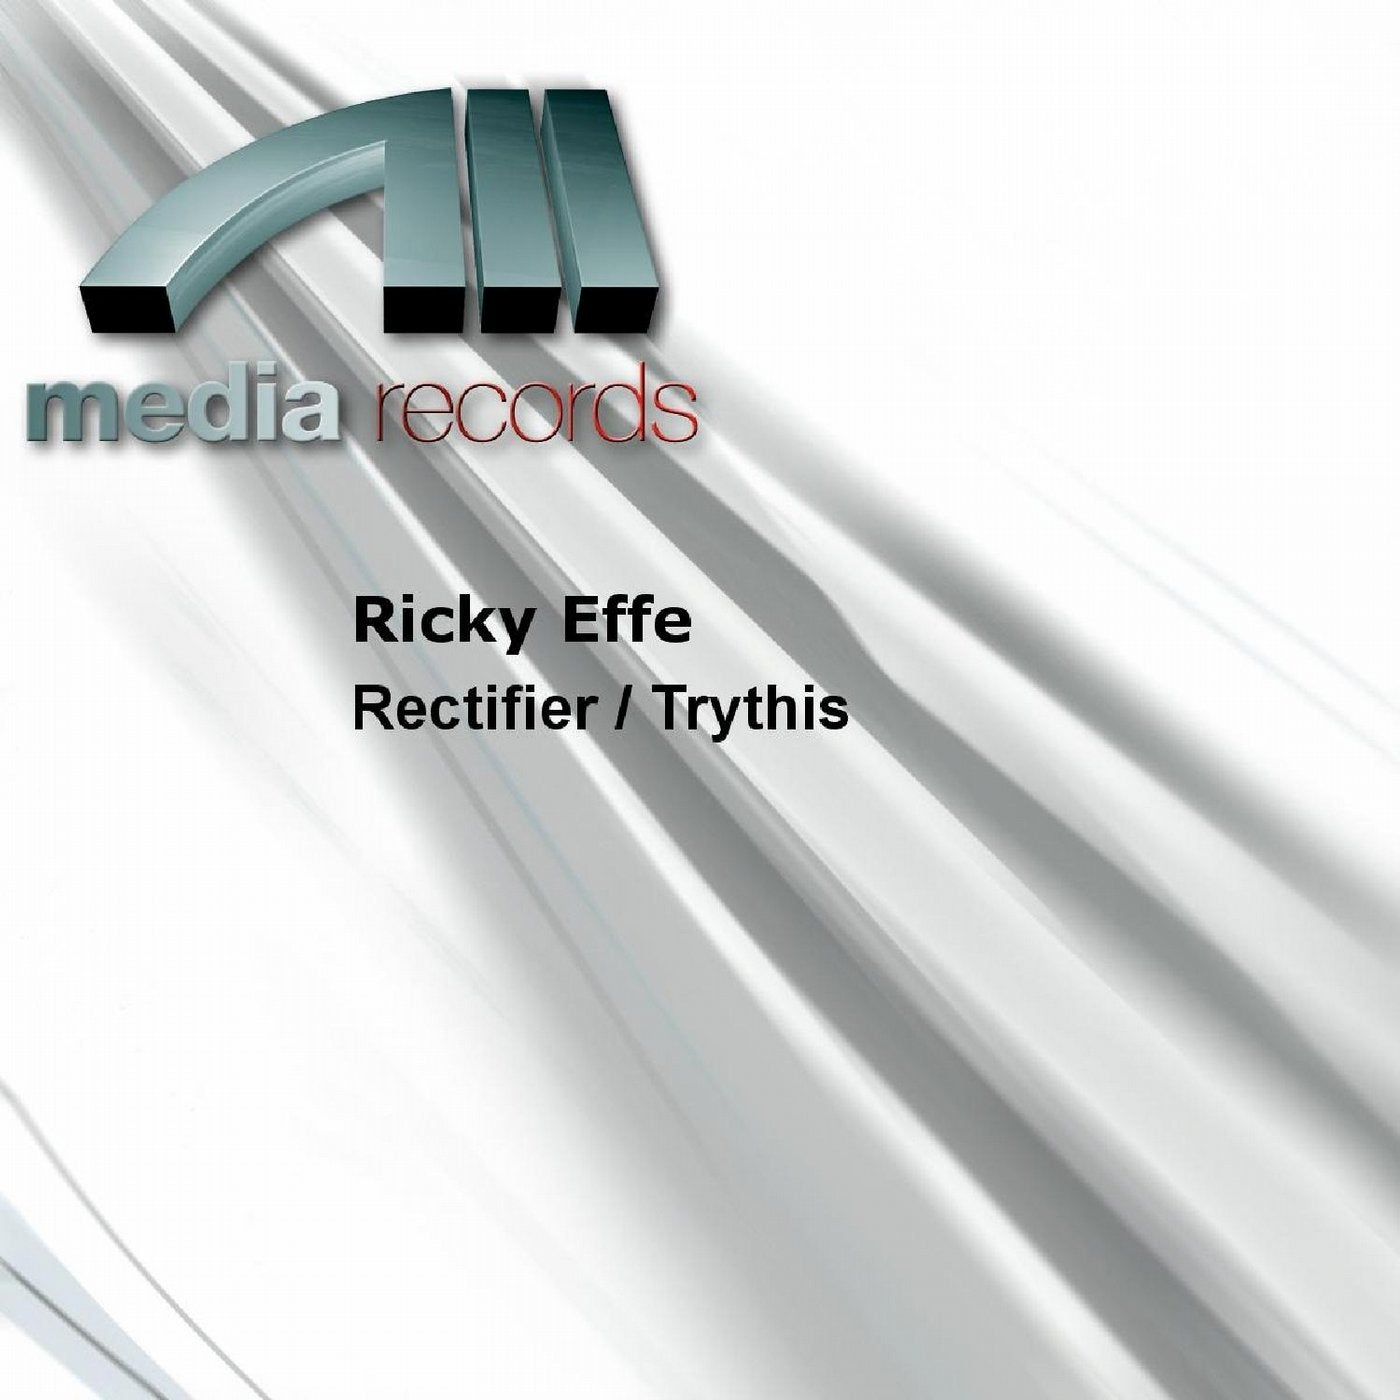 Rectifier / Trythis